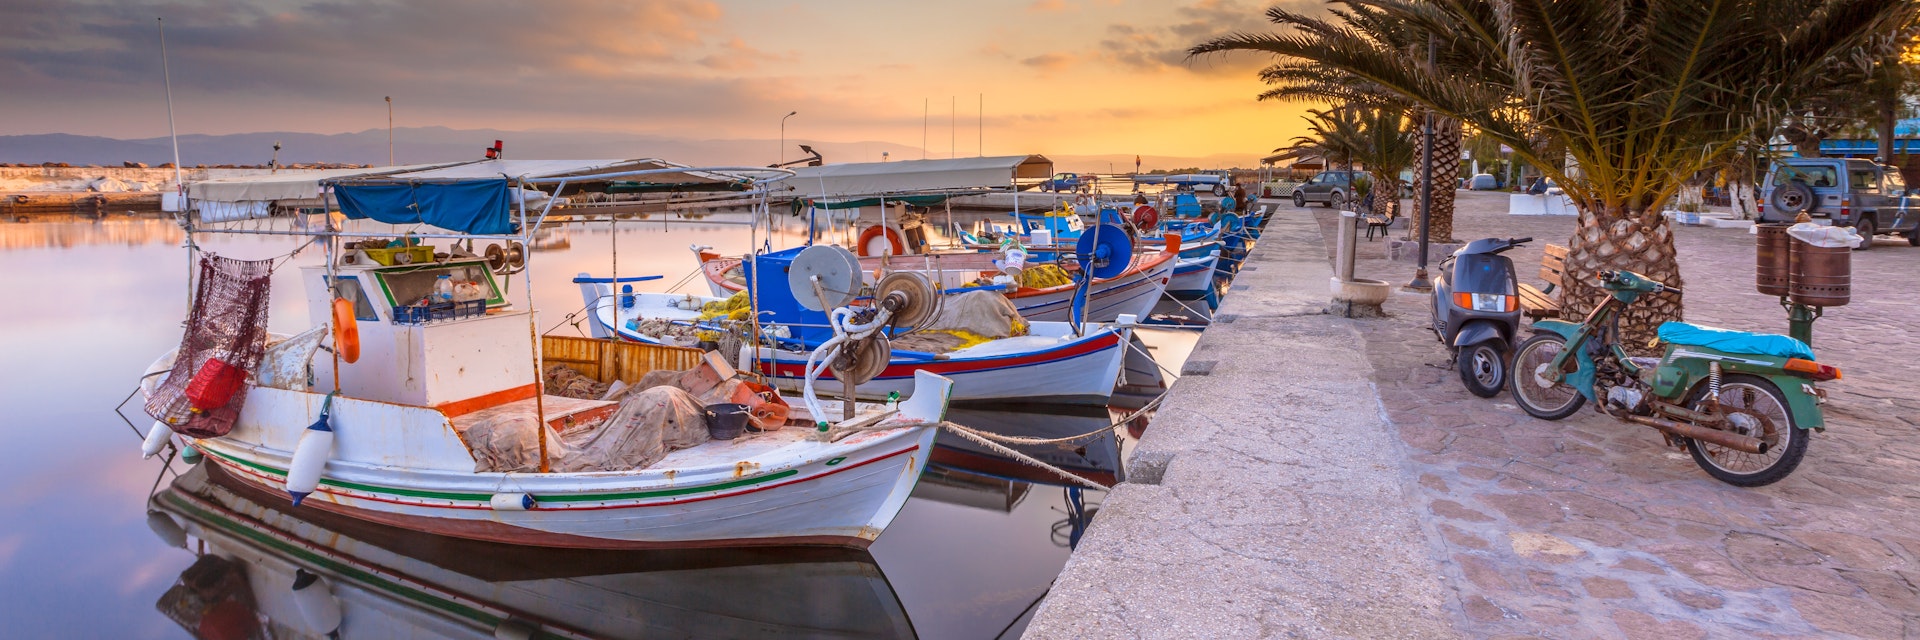 Fishing harbor scene in Greece with boats, palm trees and scooters at sunrise on a beautiful tranquil summer day